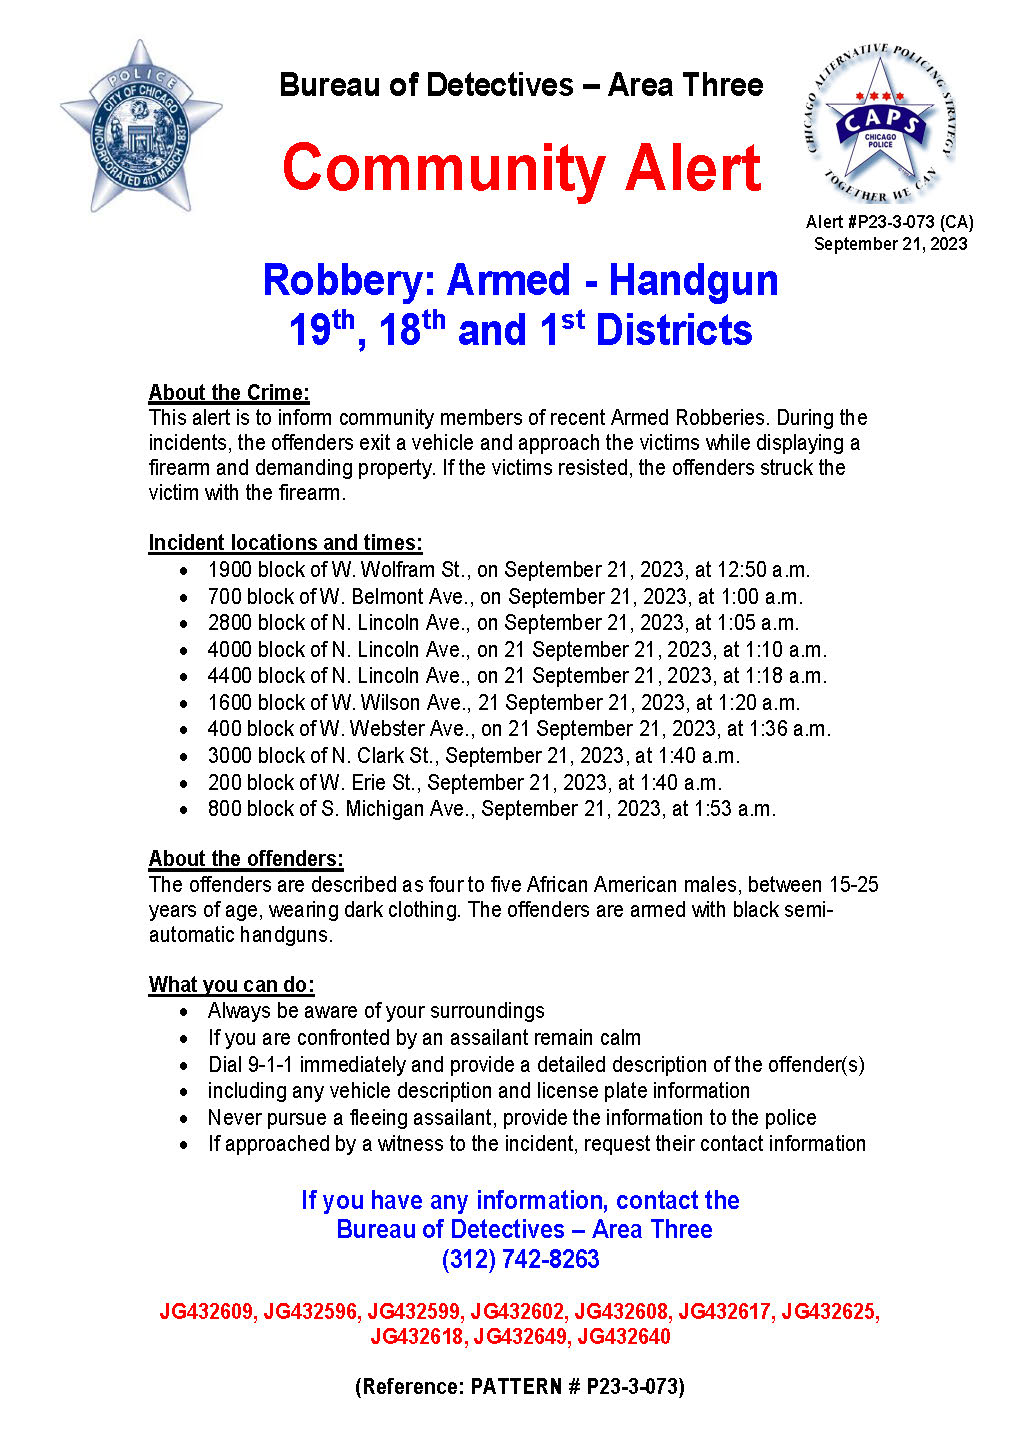 21-Sep-23-Community-Alert-Armed-Robbery-19th-18th-1st-Districts-P23-3-073